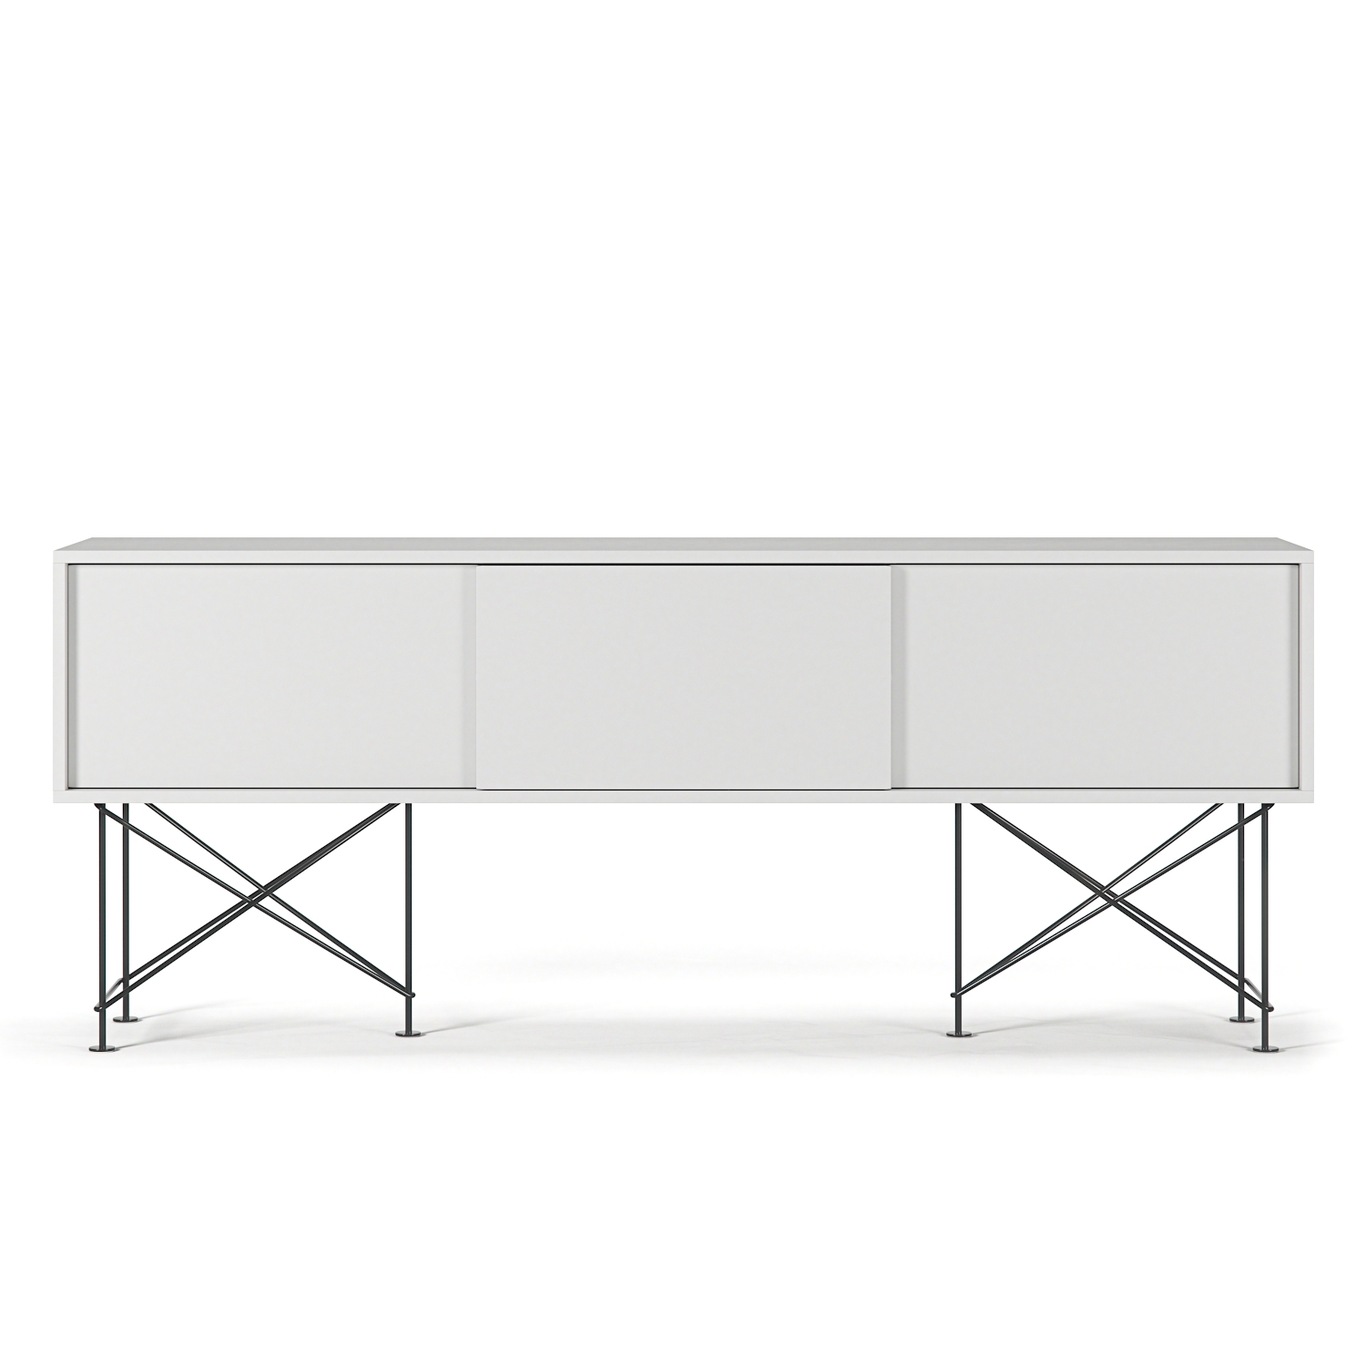 Vogue Media Bench With Stand 180 cm, White / Black